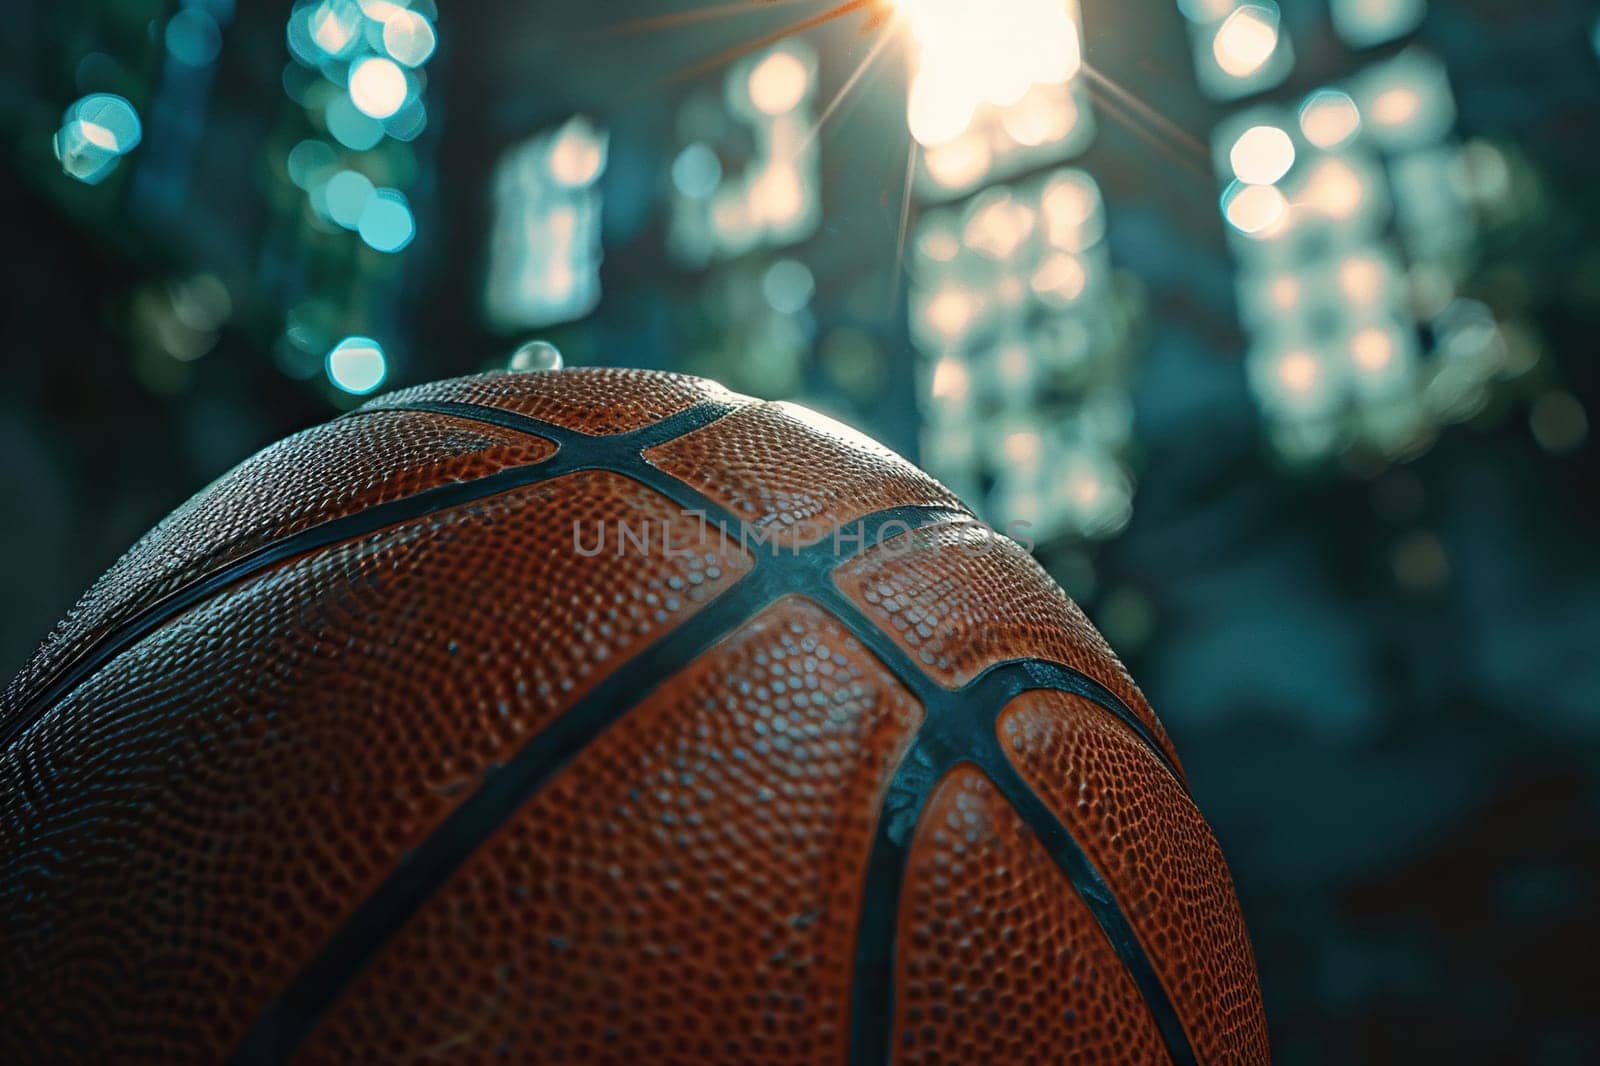 Basketball close-up with blurred background. Professional basketball game concept. Hobbies and recreation. Generated by artificial intelligence by Vovmar